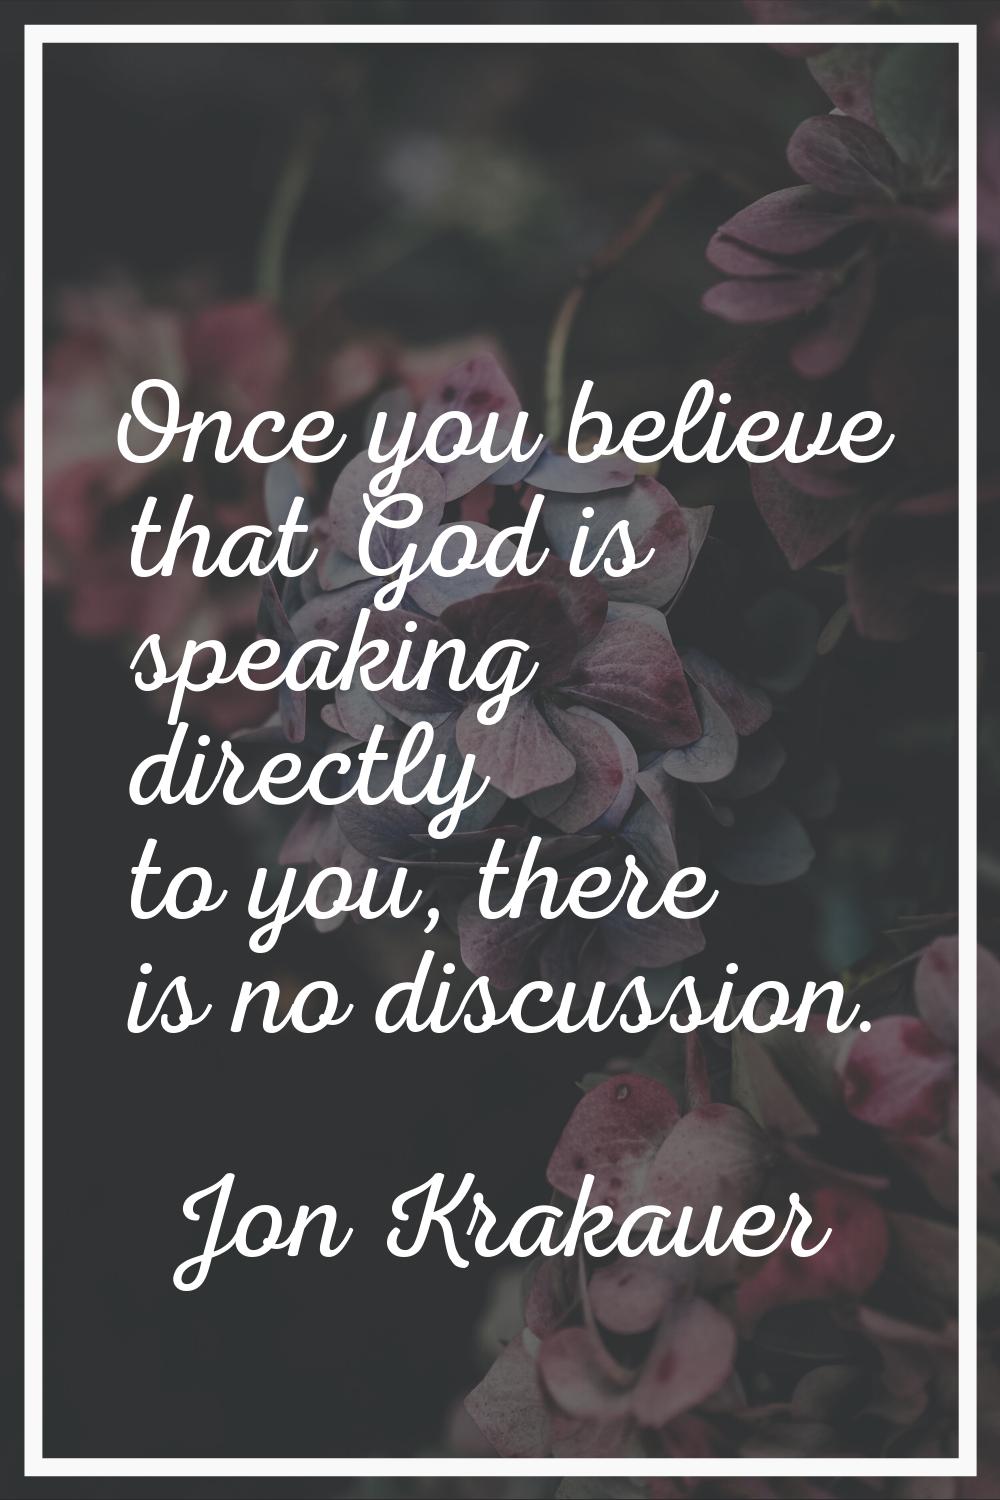 Once you believe that God is speaking directly to you, there is no discussion.